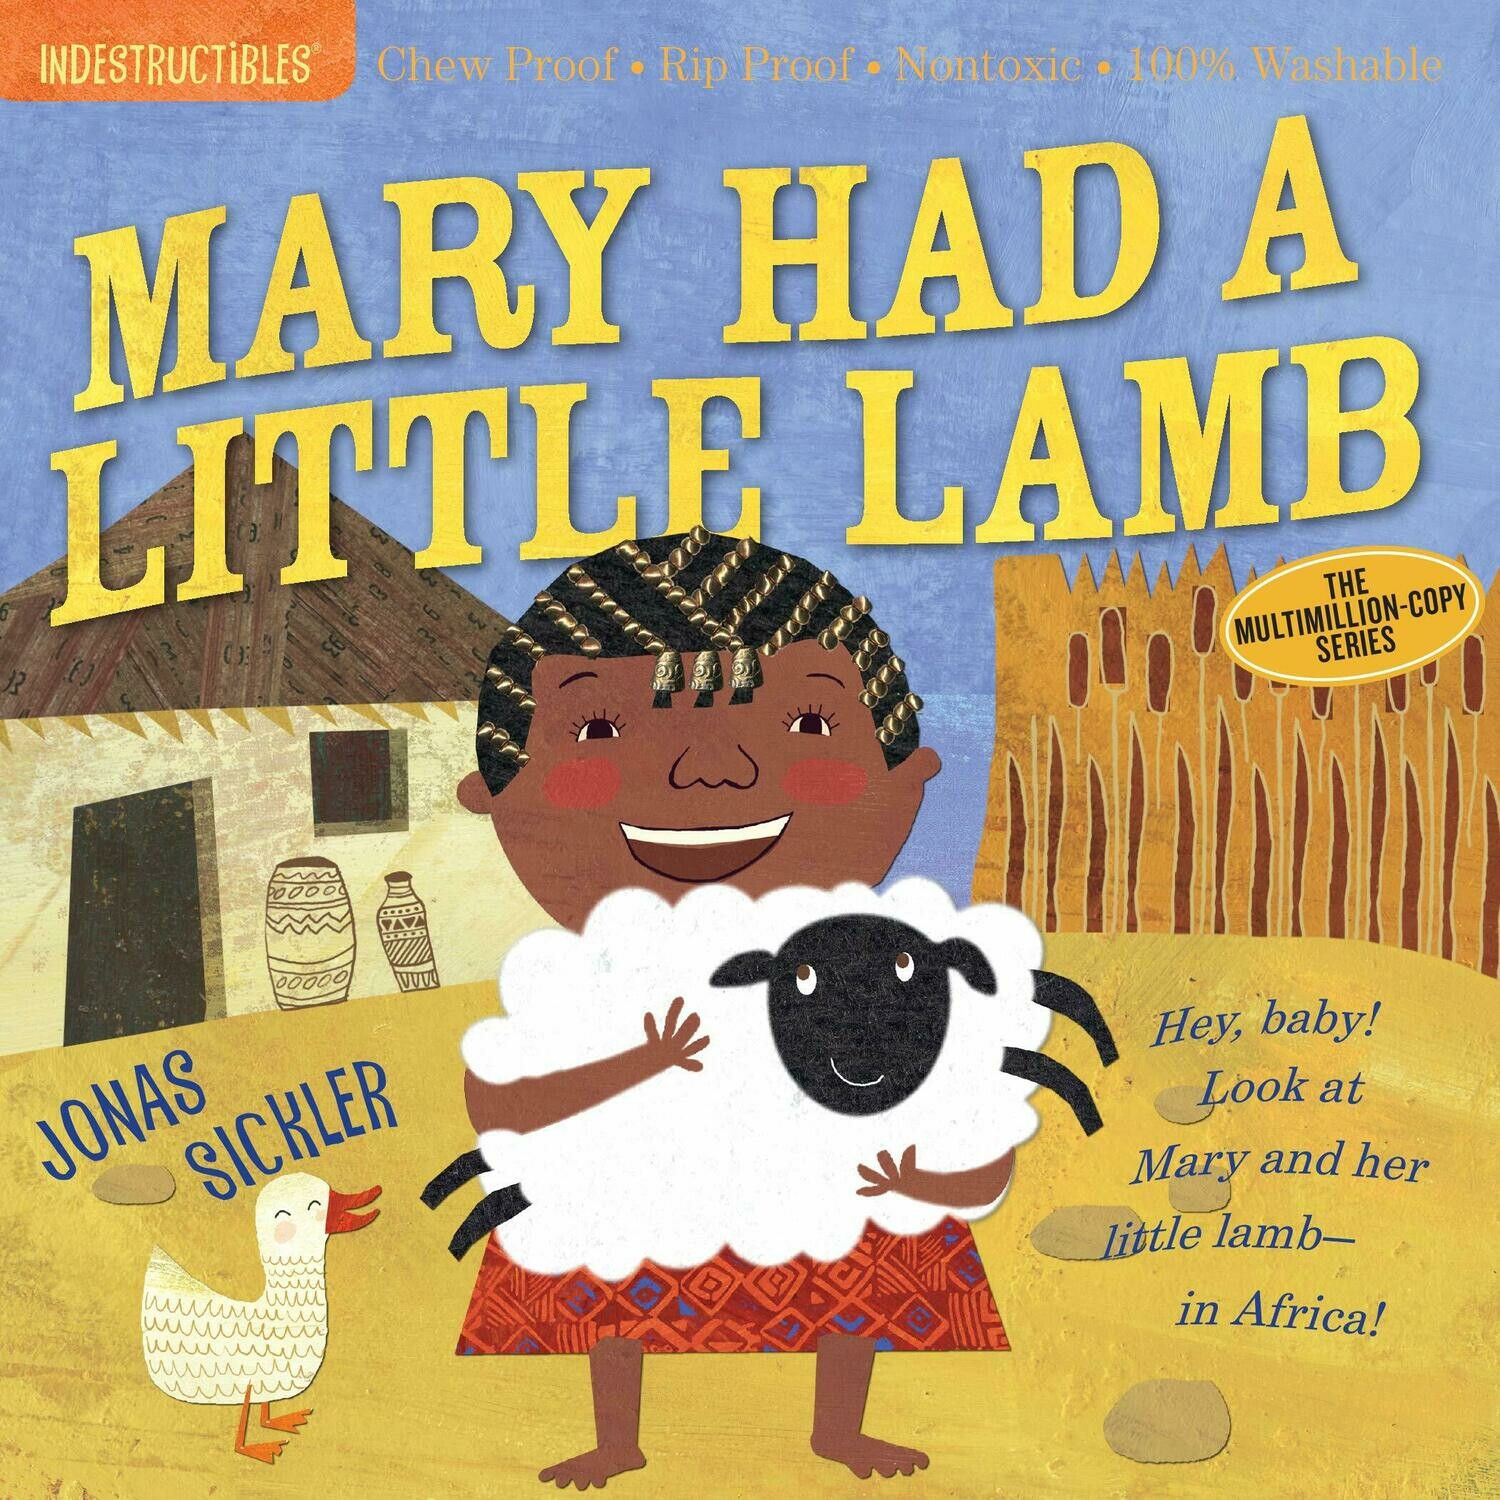 Indestructibles Book "Mary Had a Little Lamb"